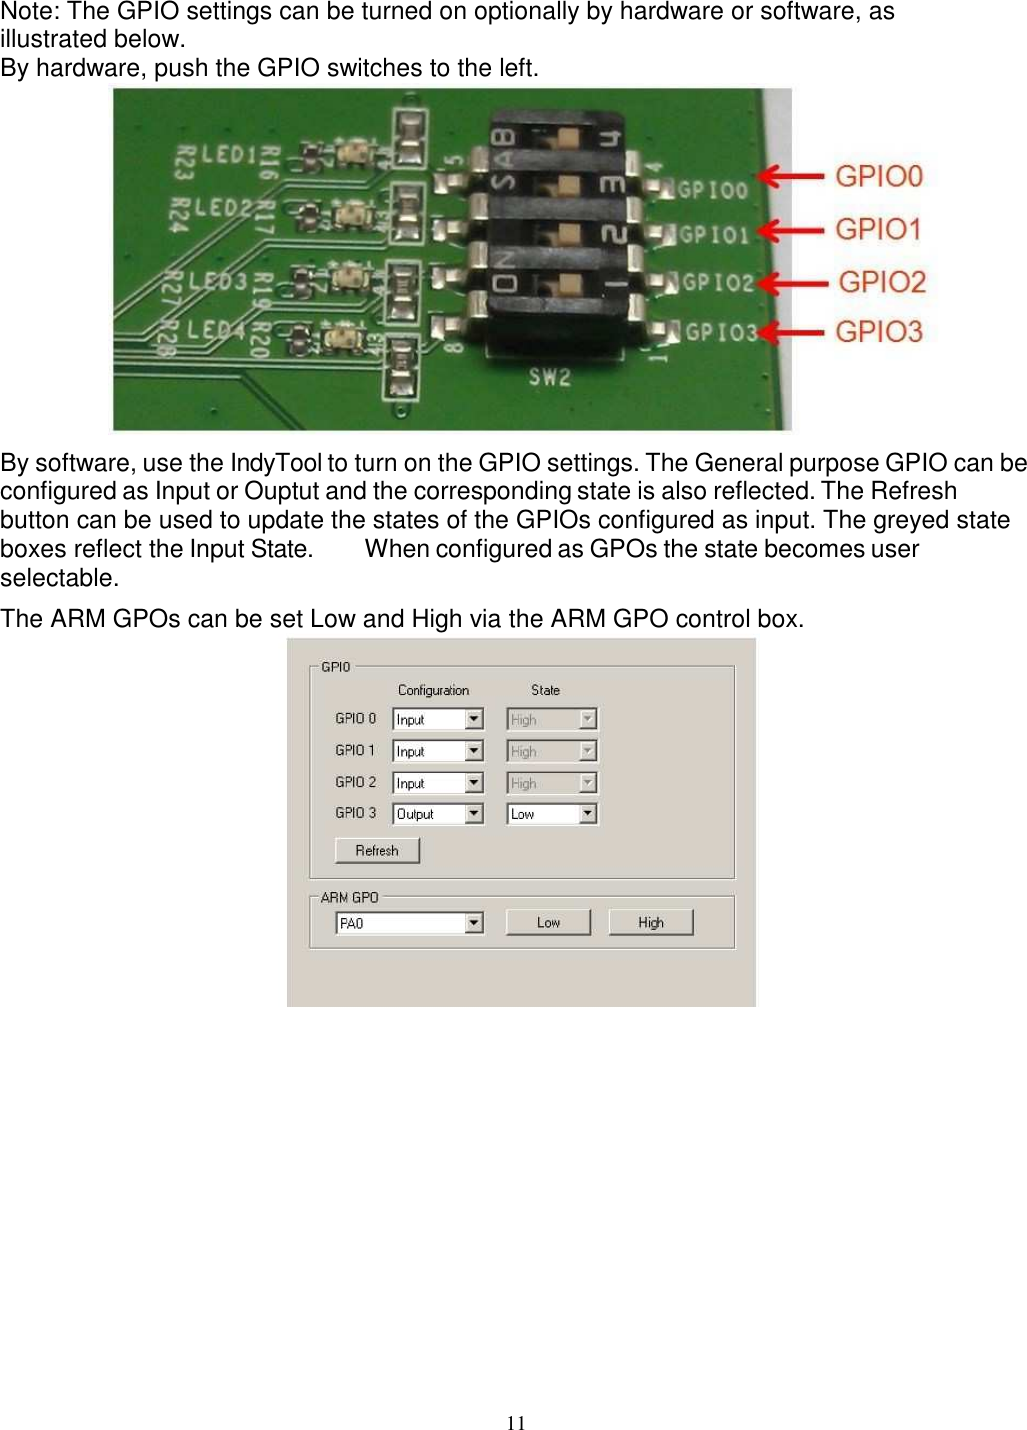 11    Note: The GPIO settings can be turned on optionally by hardware or software, as illustrated below. By hardware, push the GPIO switches to the left.  By software, use the IndyTool to turn on the GPIO settings. The General purpose GPIO can be configured as Input or Ouptut and the corresponding state is also reflected. The Refresh button can be used to update the states of the GPIOs configured as input. The greyed state boxes reflect the Input State.  When configured as GPOs the state becomes user selectable. The ARM GPOs can be set Low and High via the ARM GPO control box.  